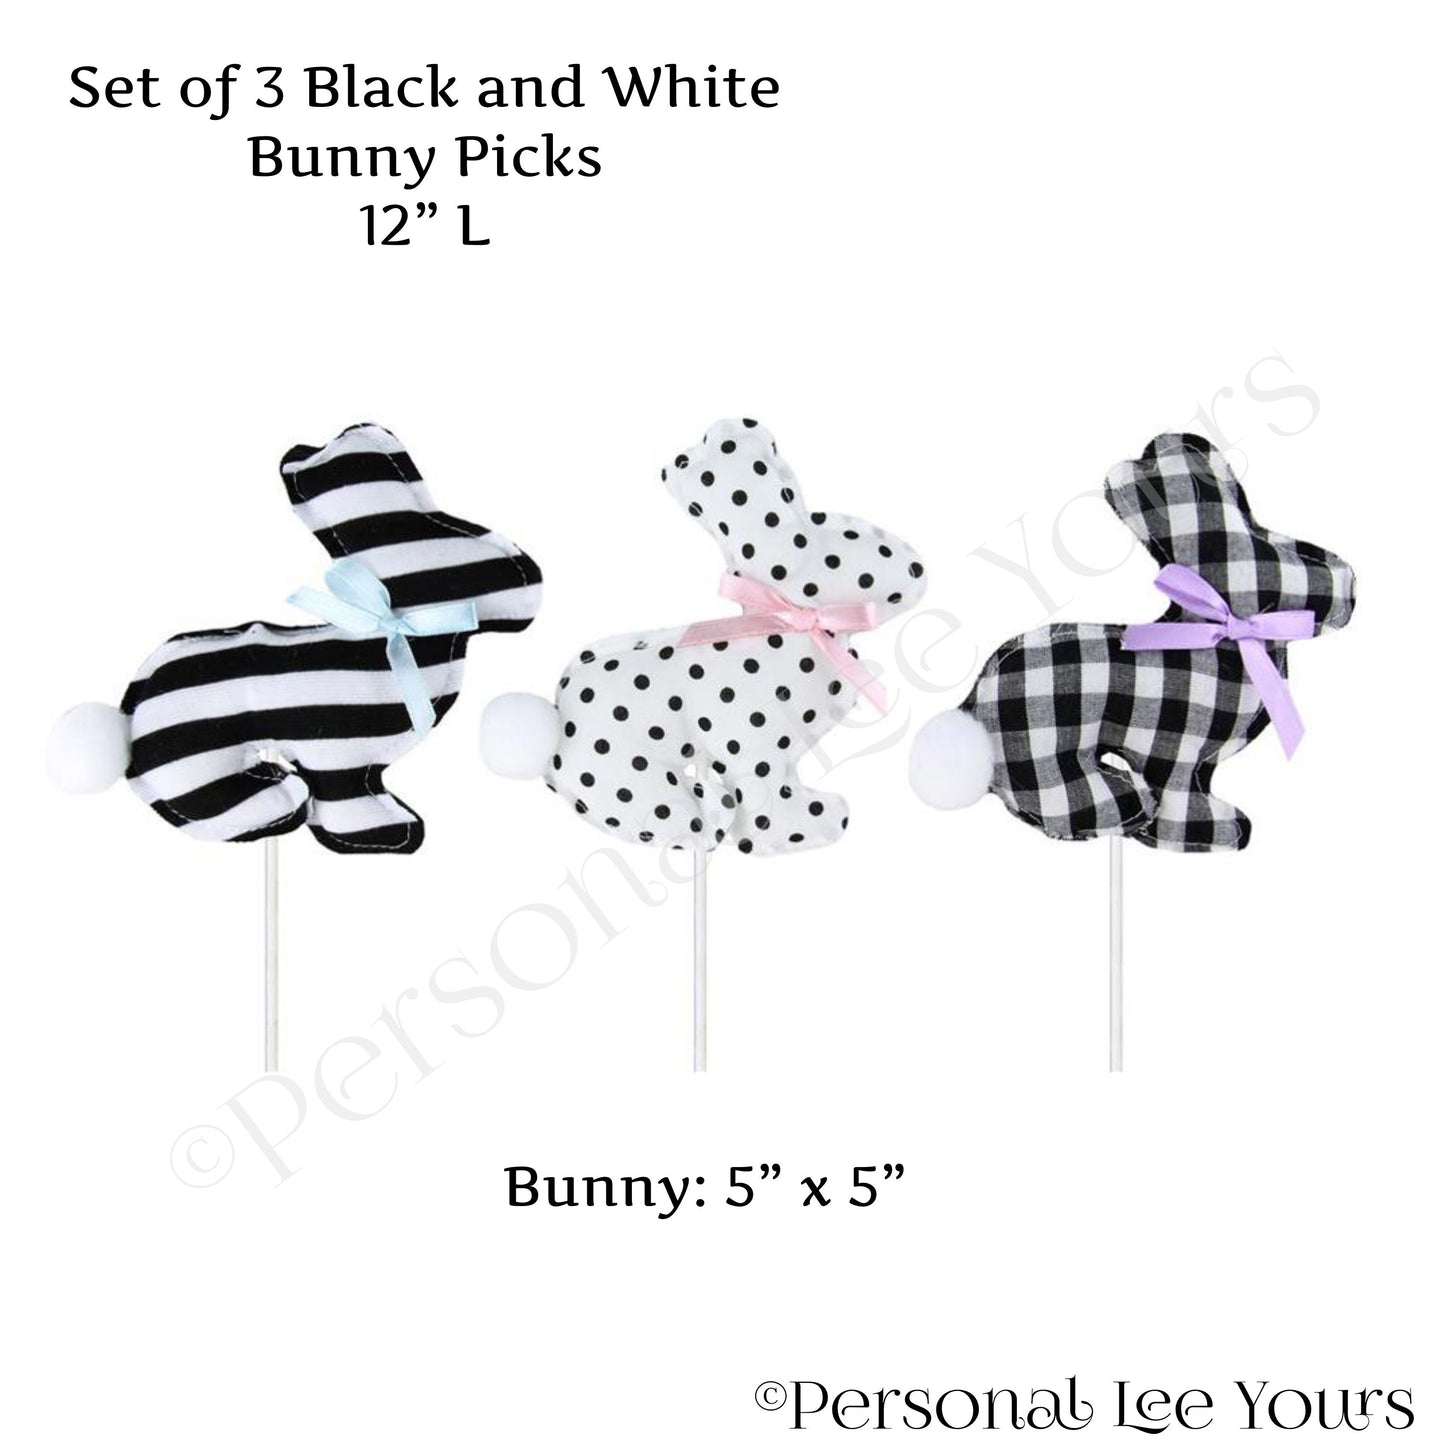 Plush Bunny Picks * Set of 3 * 12" tall * Black and White * 1 of Each Design * Bunny is 5" x 5" * HE4160